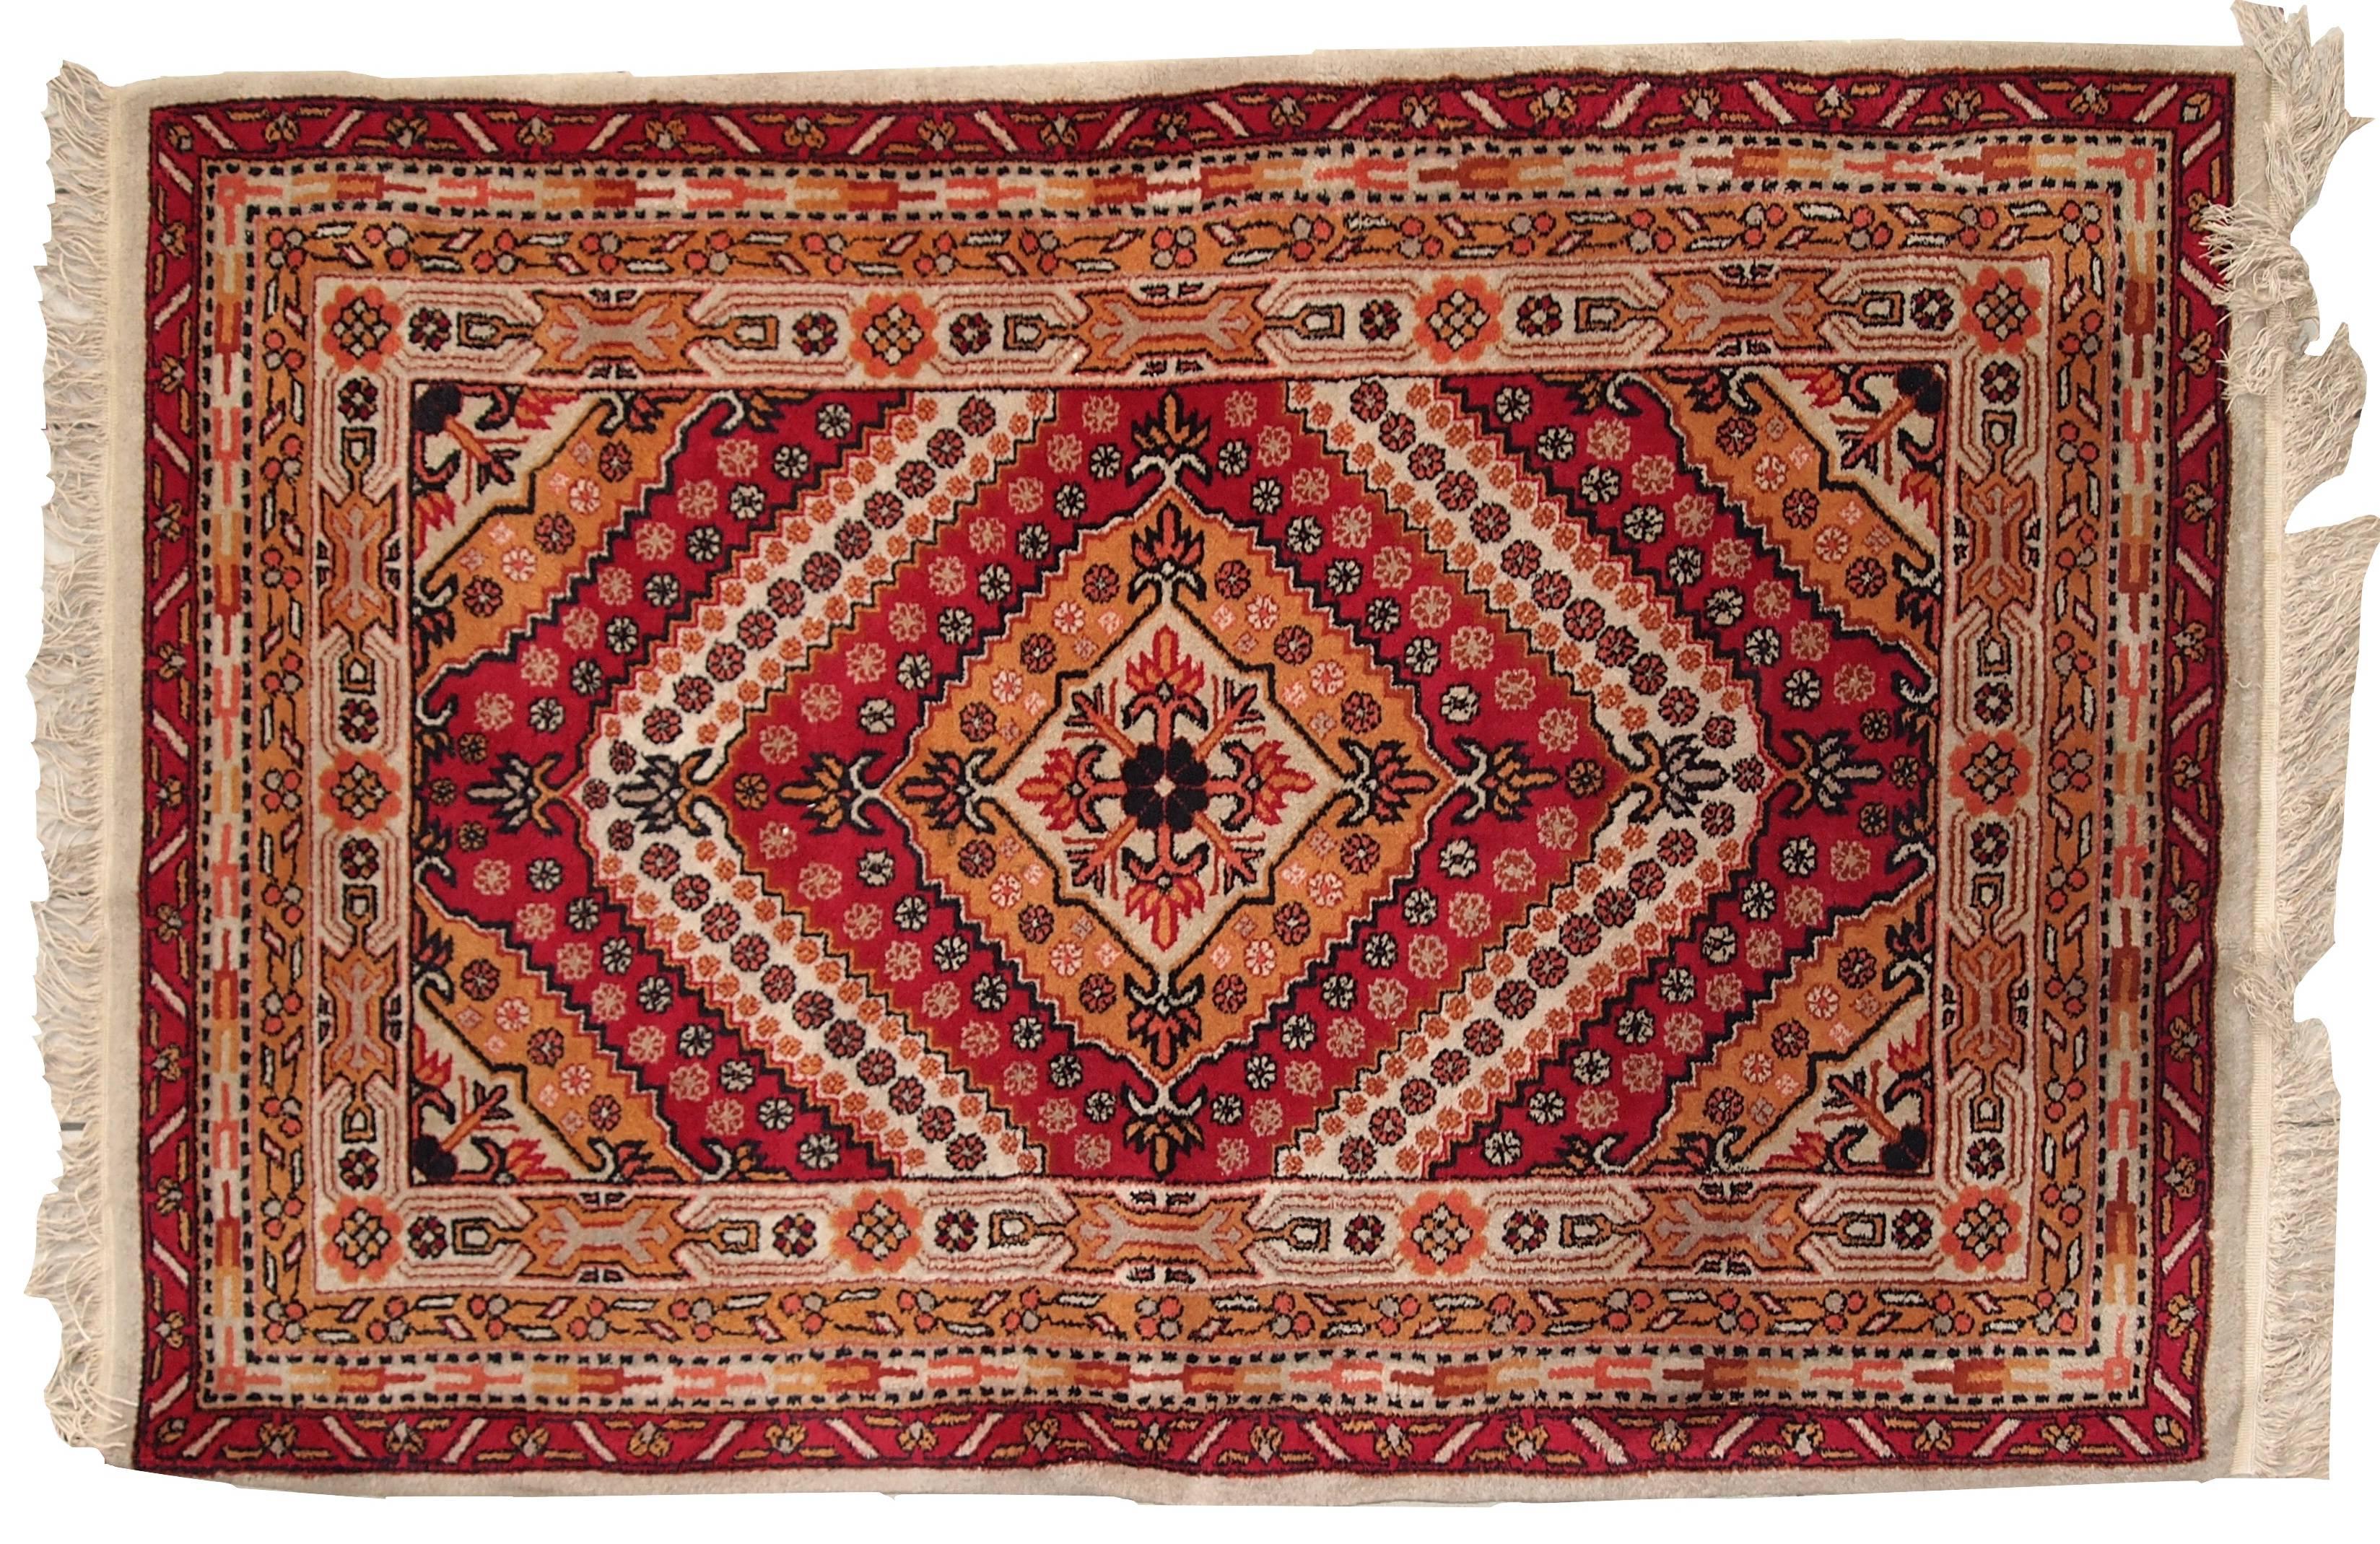 Antique Art Deco Chinese rug in red color. This handmade masterpiece is in a good original condition, very thick with full soft pile. The background is in red colour covered with increasing diamonds from the centre in golden and white shades. Little